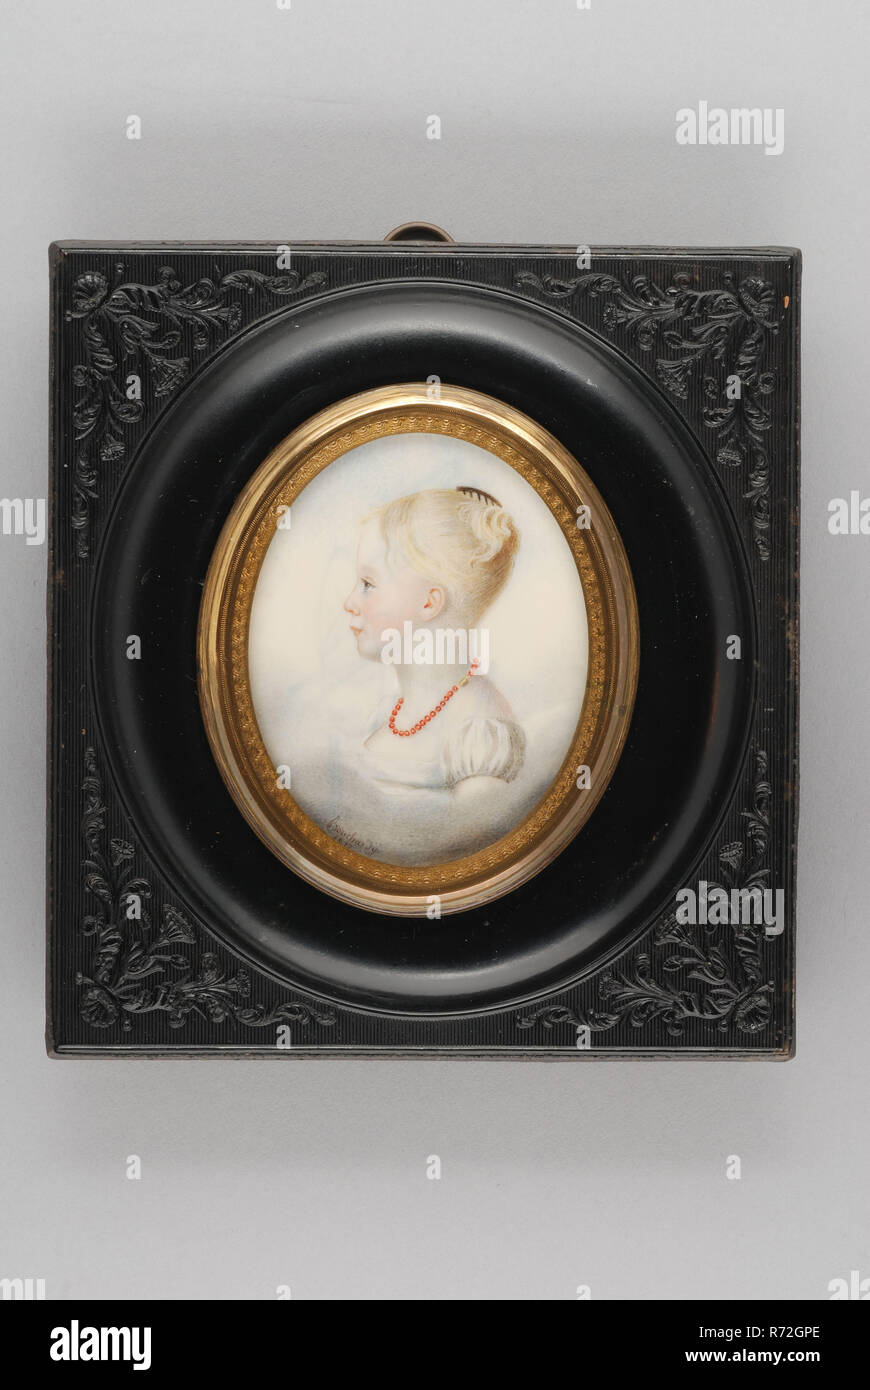 Etienne Bouchardy, Portrait miniature by Louise van Hogendorp (-1812), portrait miniature painting footage wood ivory paint watercolor plastic bakelite? ivory support (daily size), Wooden frame in upright rectangular format top covered with bakelite This is an oval girl's portrait with an oval copper colored decorative frame. Globe glass slide. On the reverse side of the hanging eye Front under the chest on cloudy background: Bouchardij 1812 Rotterdam Augusta Carolina Princess of Hohenlohe-Langenburg Dirk count of Hogendorp Louise van Hogendorp Van Hogendorp dead heaven Stock Photo